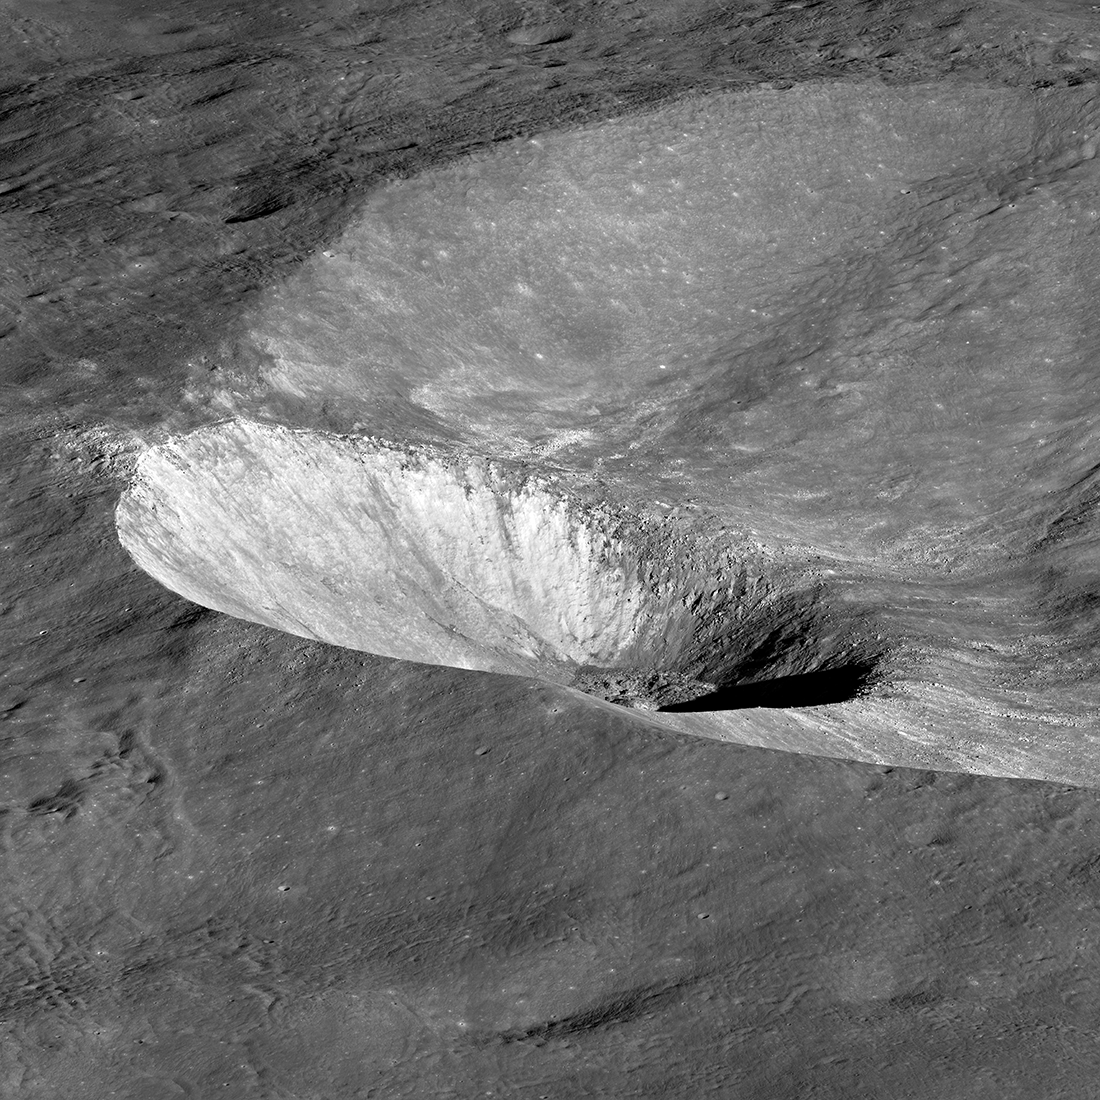 Bright, small crater crater on the sloped edge of a larger crater